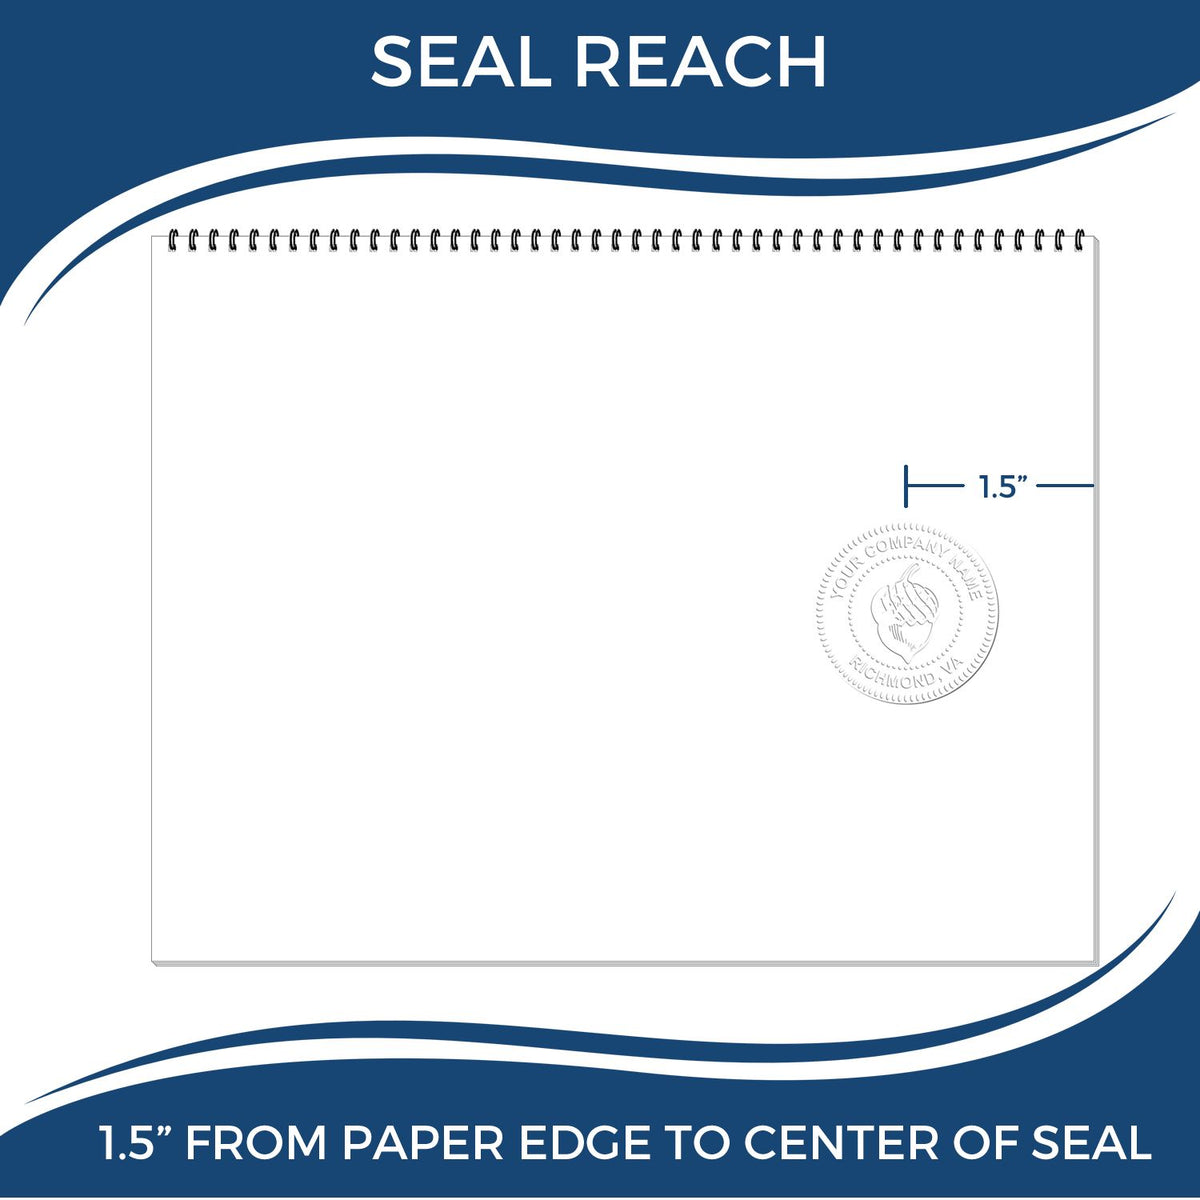 An infographic showing the seal reach which is represented by a ruler and a miniature seal image of the Gift Kentucky Landscape Architect Seal